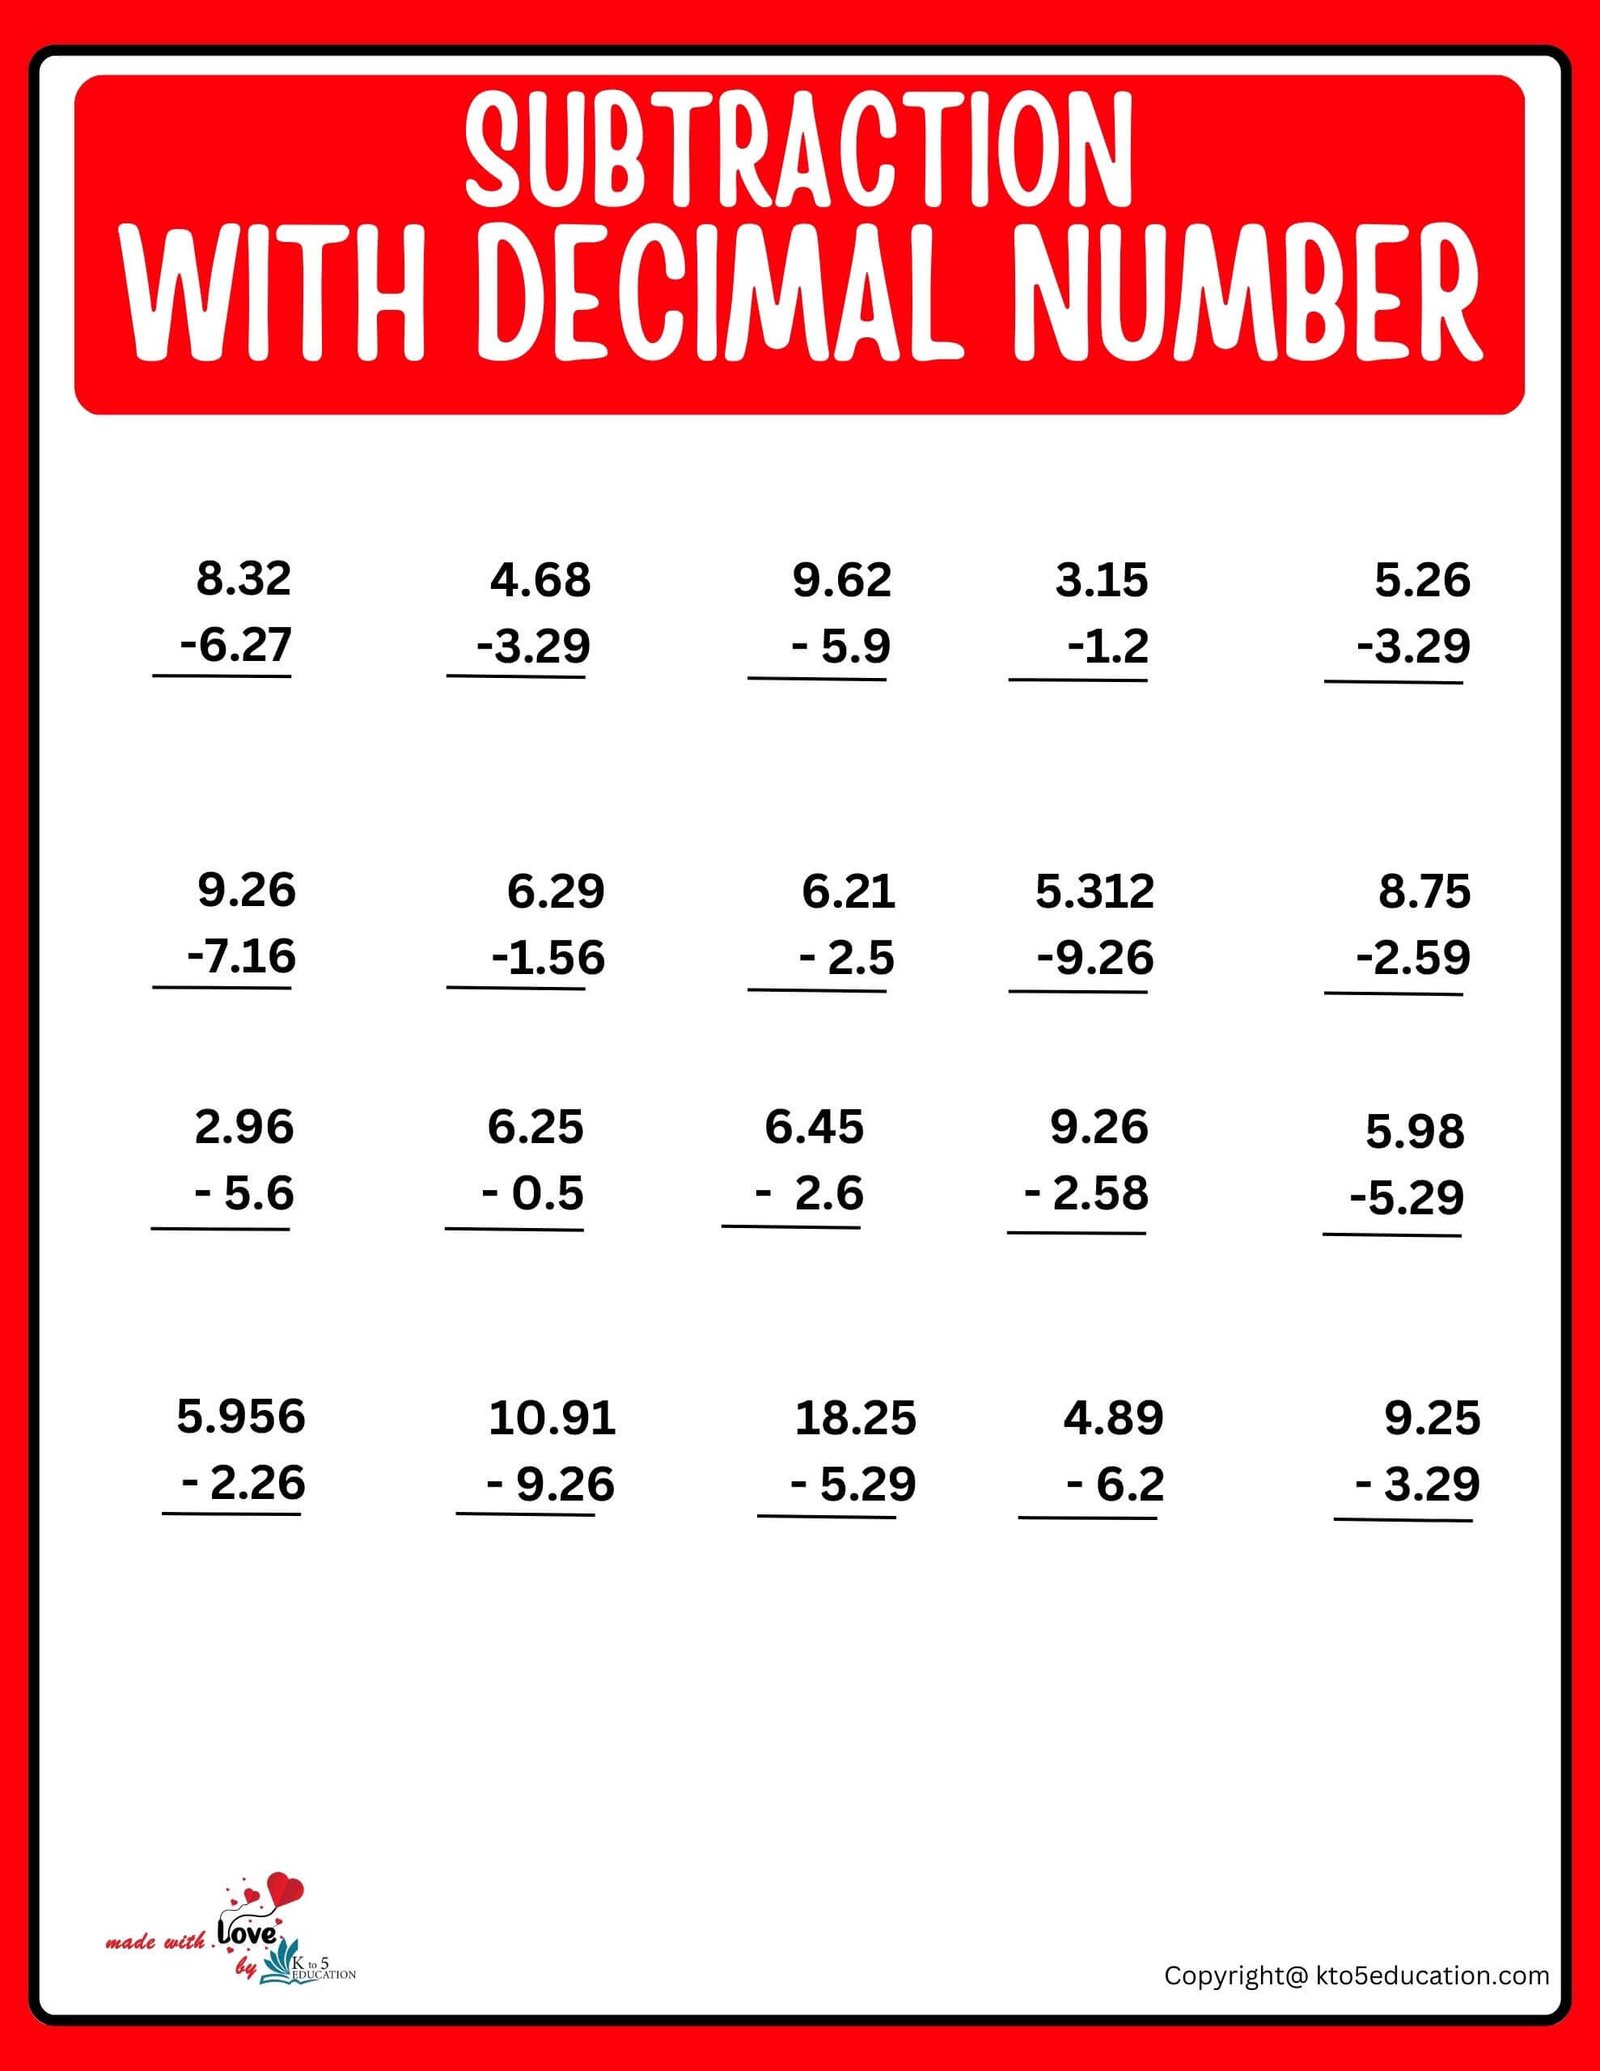 Subtraction With Decimal Number Worksheet For 4th Grade